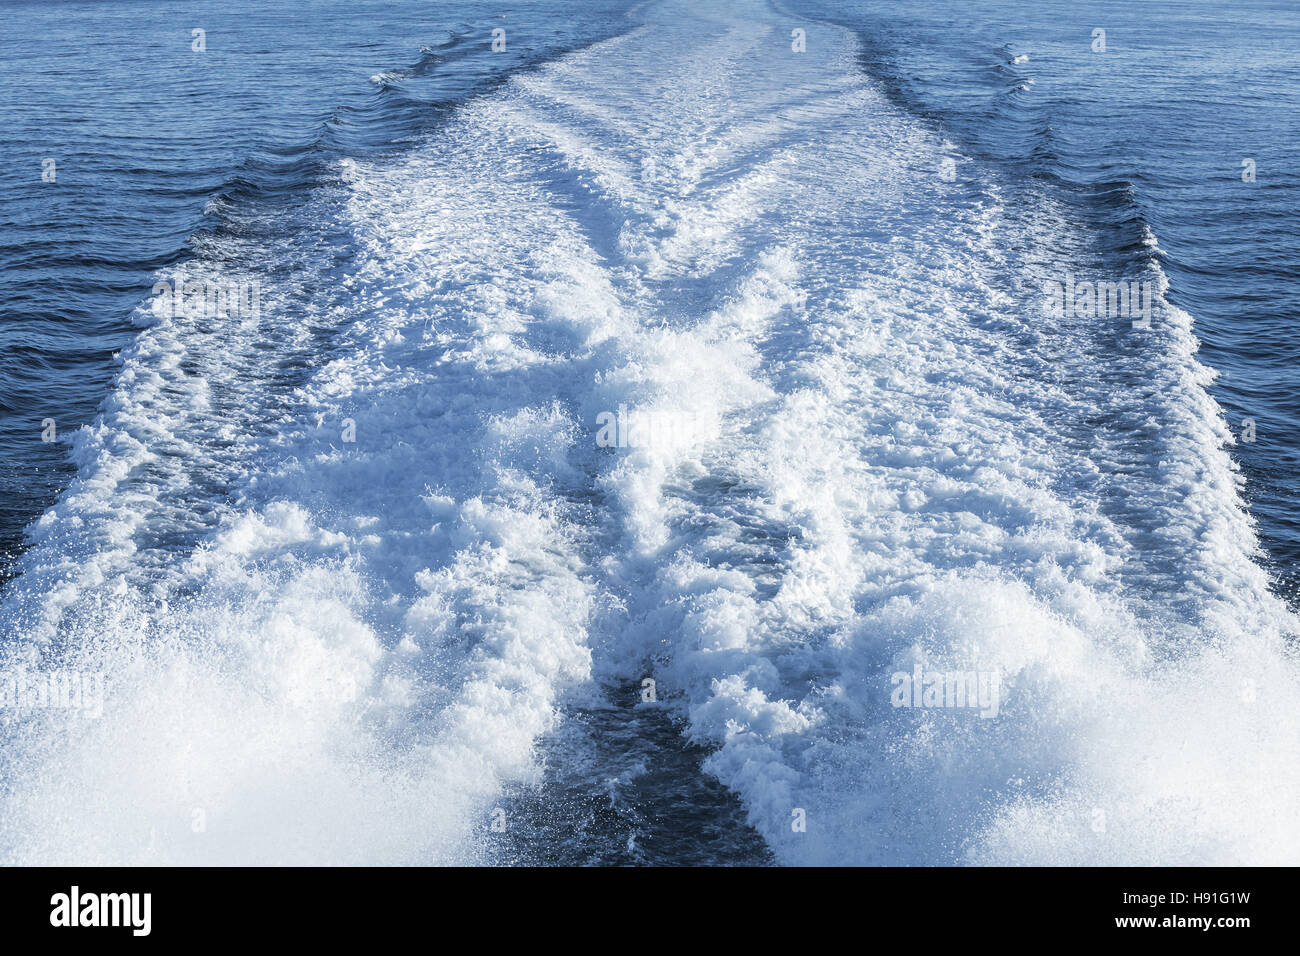 Fast motor boat wake over blue sea water Stock Photo